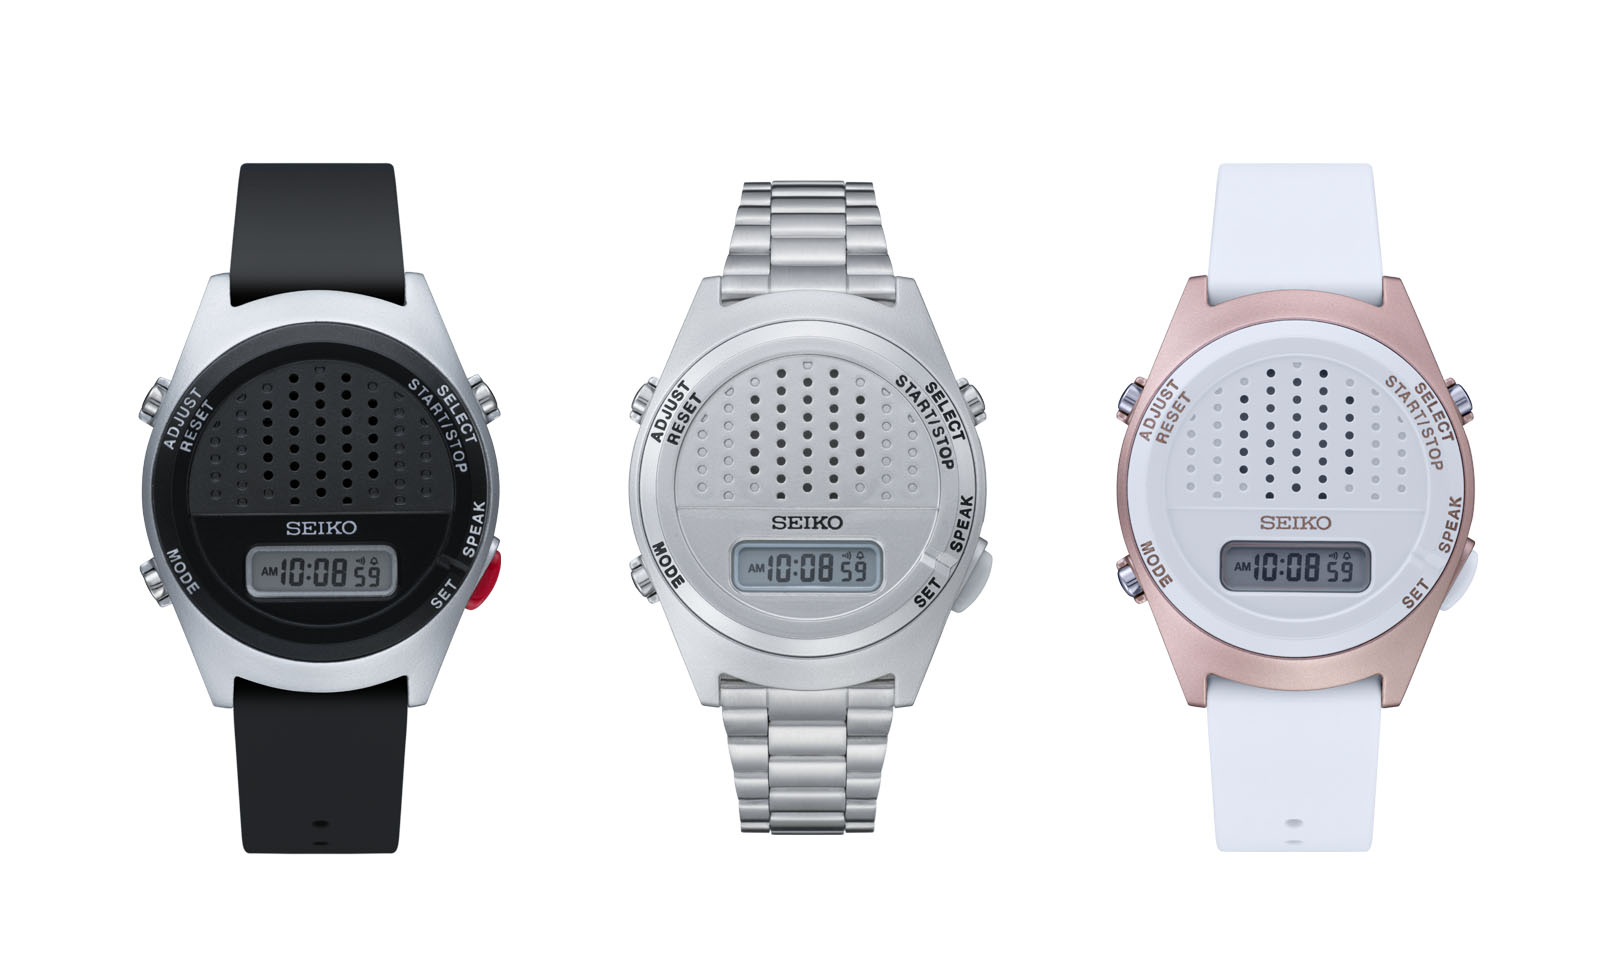 Photo of the three digital talking watches